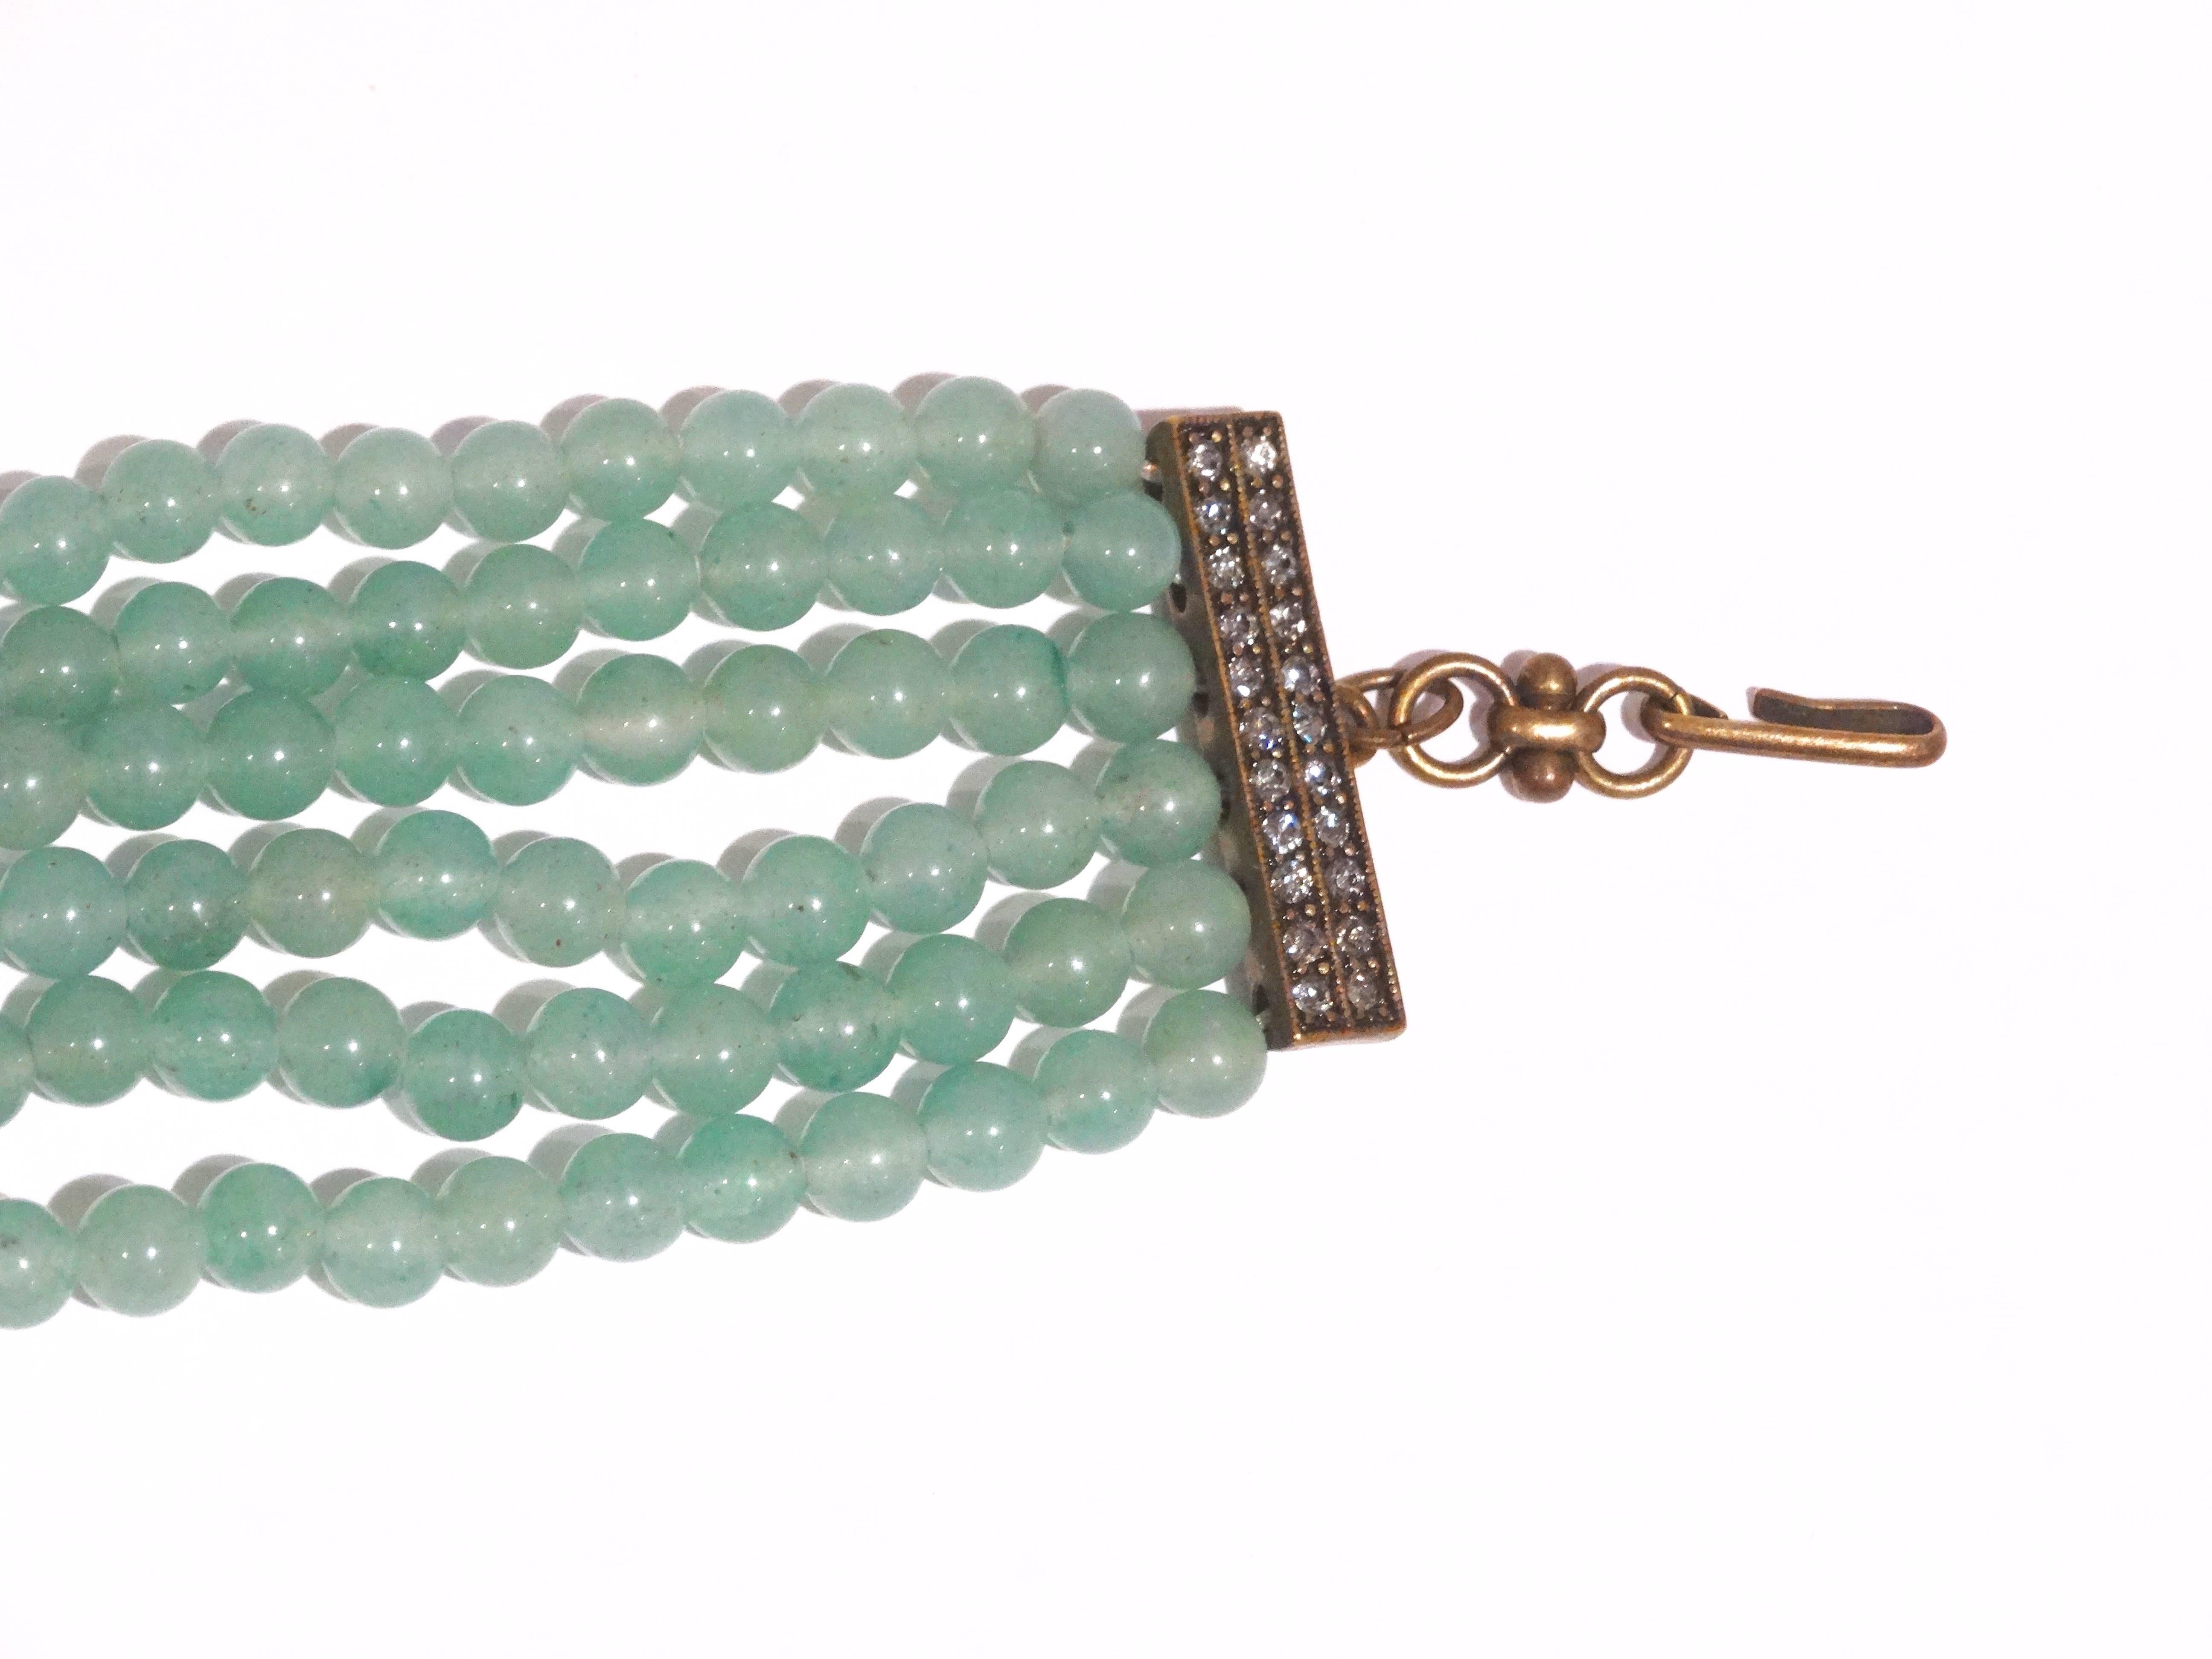 Beautiful1990s vintage jade choker with Swarovski crystals, this choker has a Victorian feel. Looks stunning on 

10 1/2